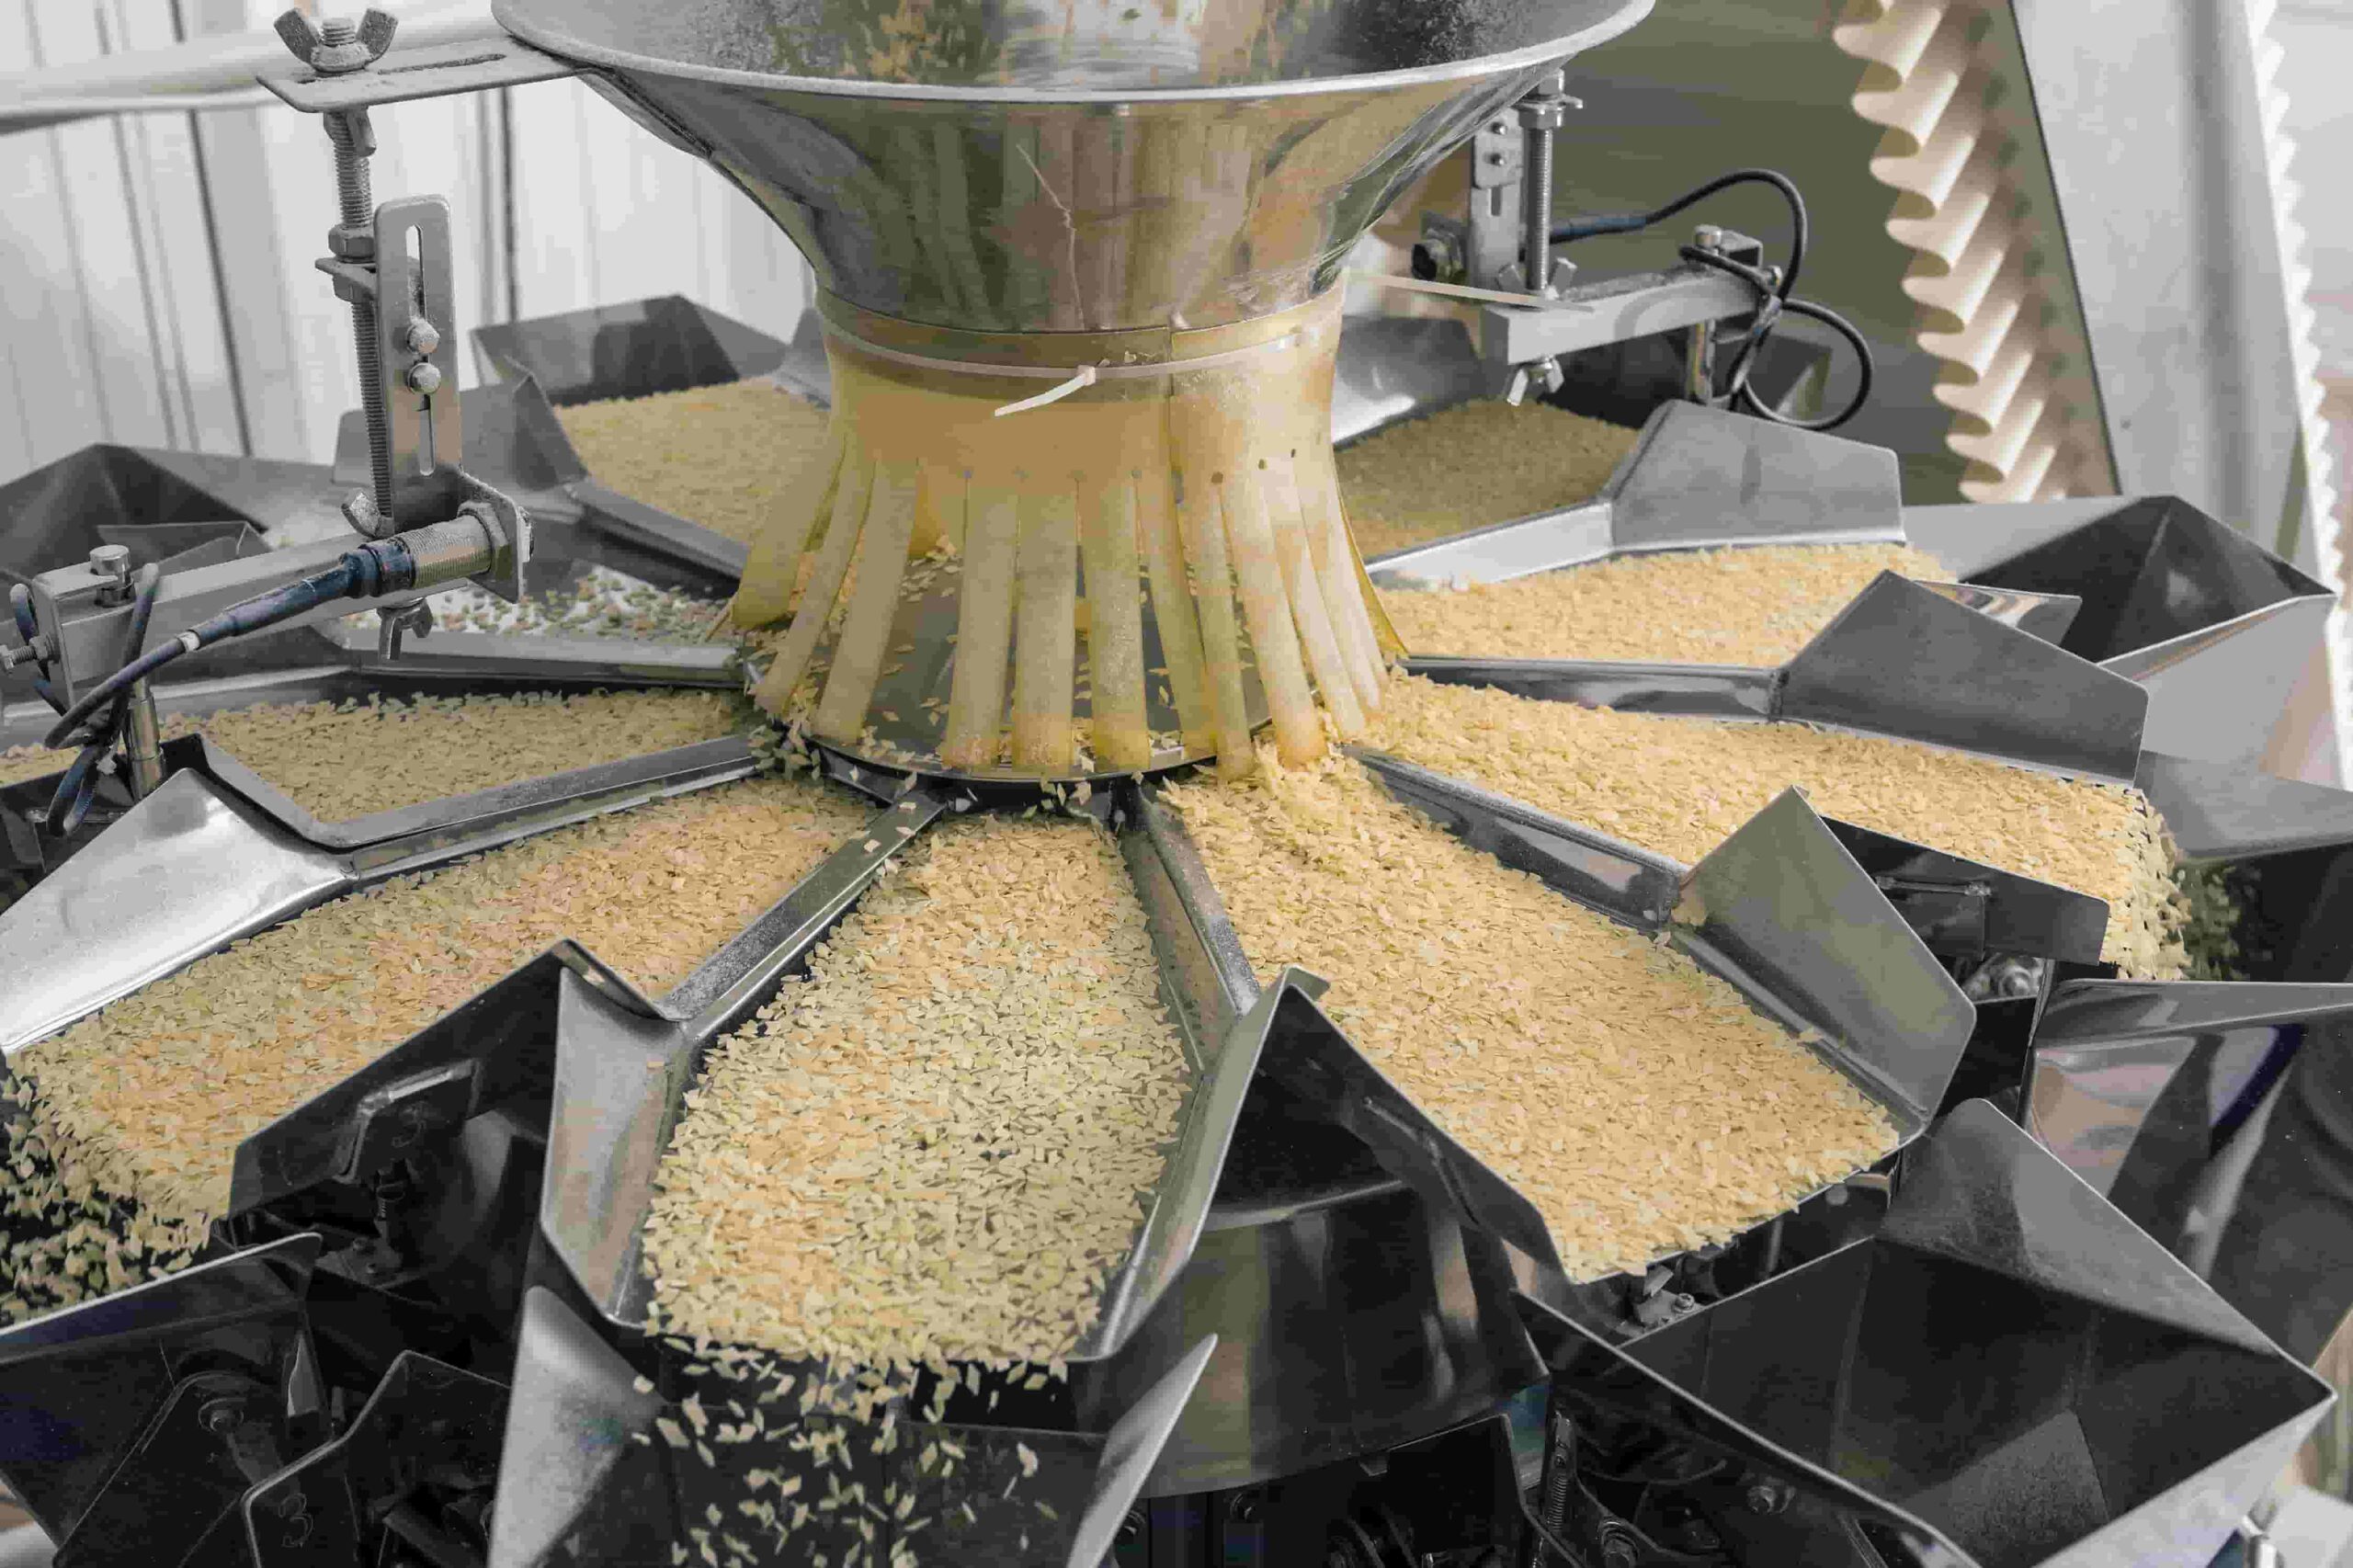 Food production machinery